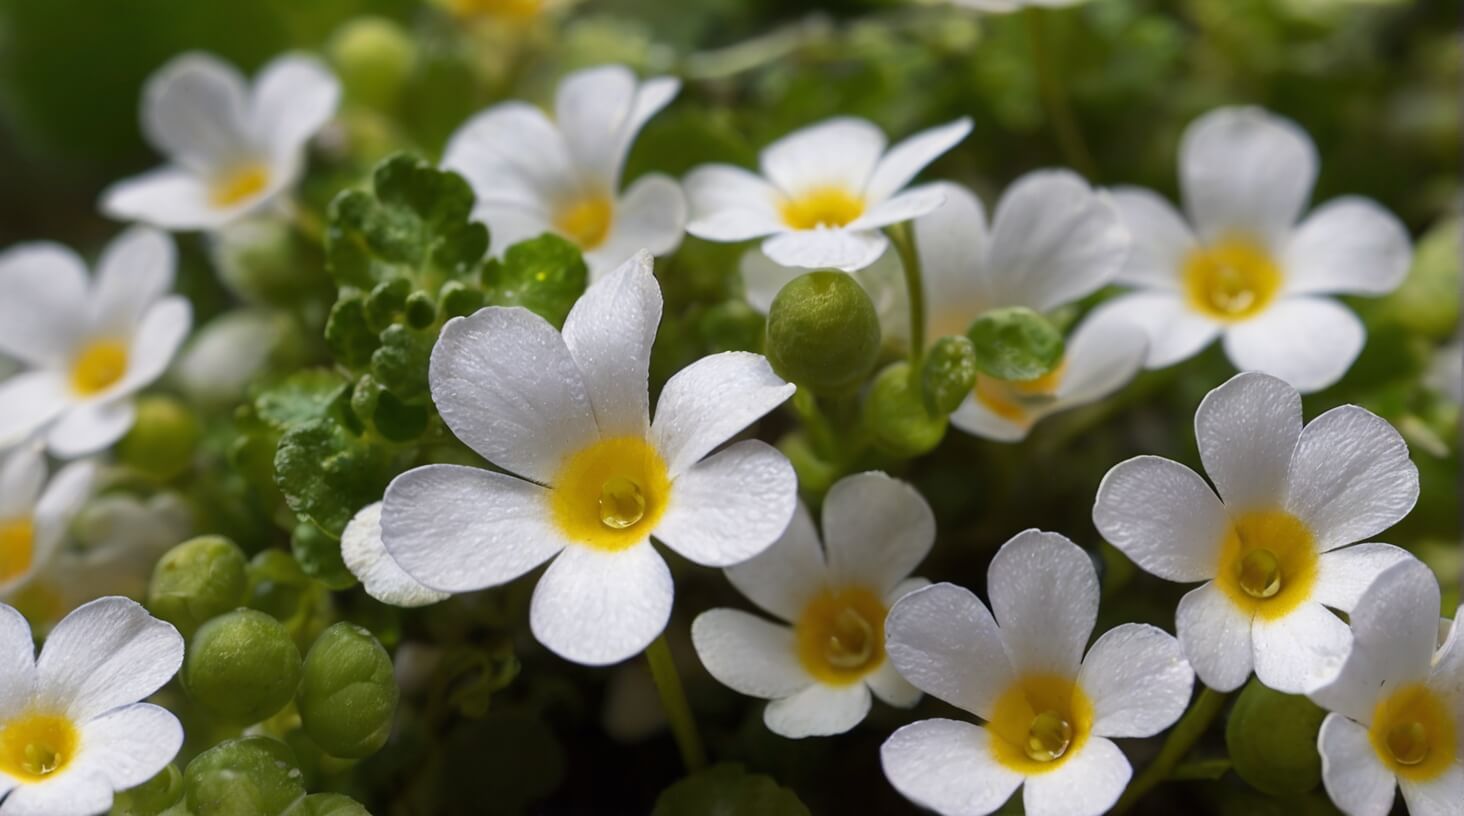 A cluster of Bacopa Monnieri leaves against a white background, symbolizing the immune-boosting properties of this herbal supplement.